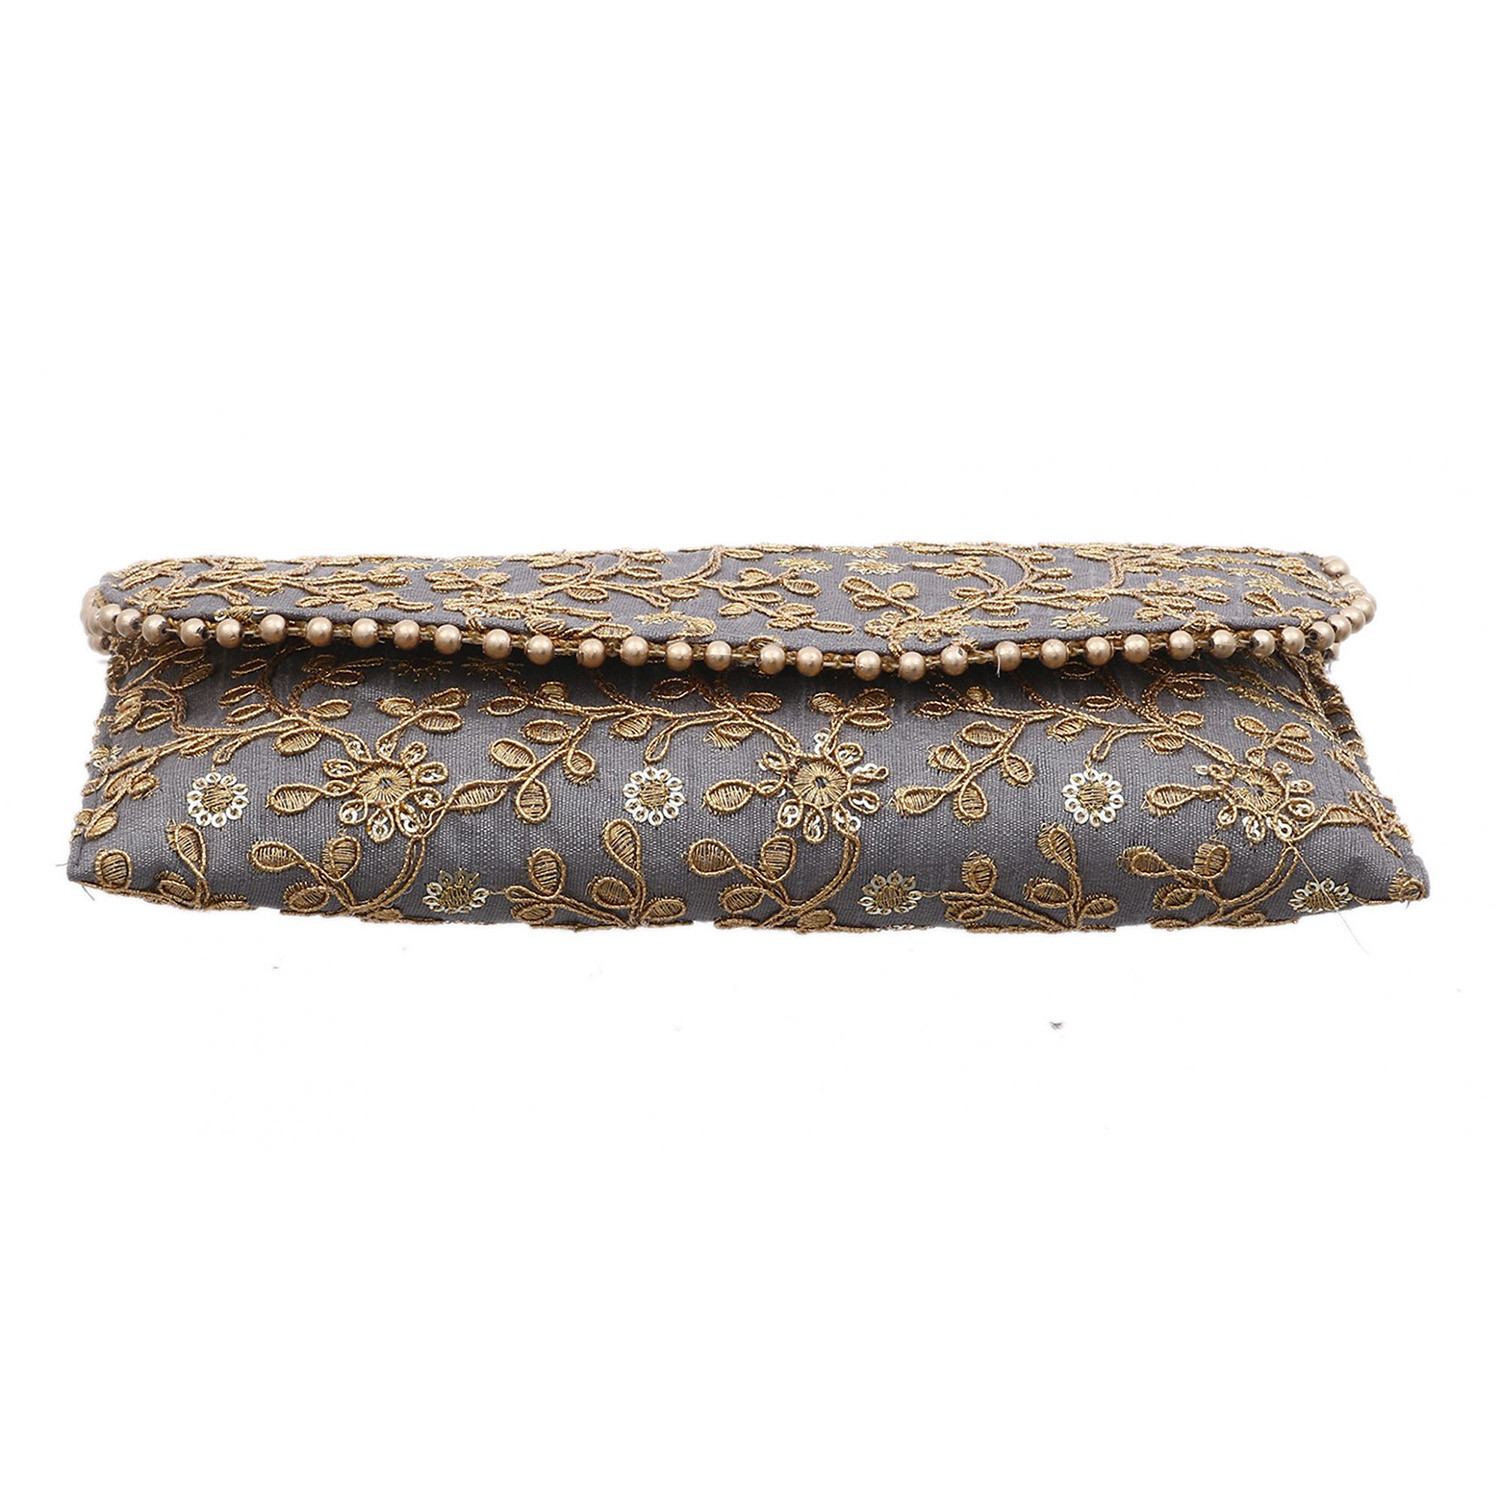 Kuber Industries Embroidery Golden Pearl Border Clutch|Hand Purse & Pearls Handle With Magnetic Lock For Woman,Girls (Gray)